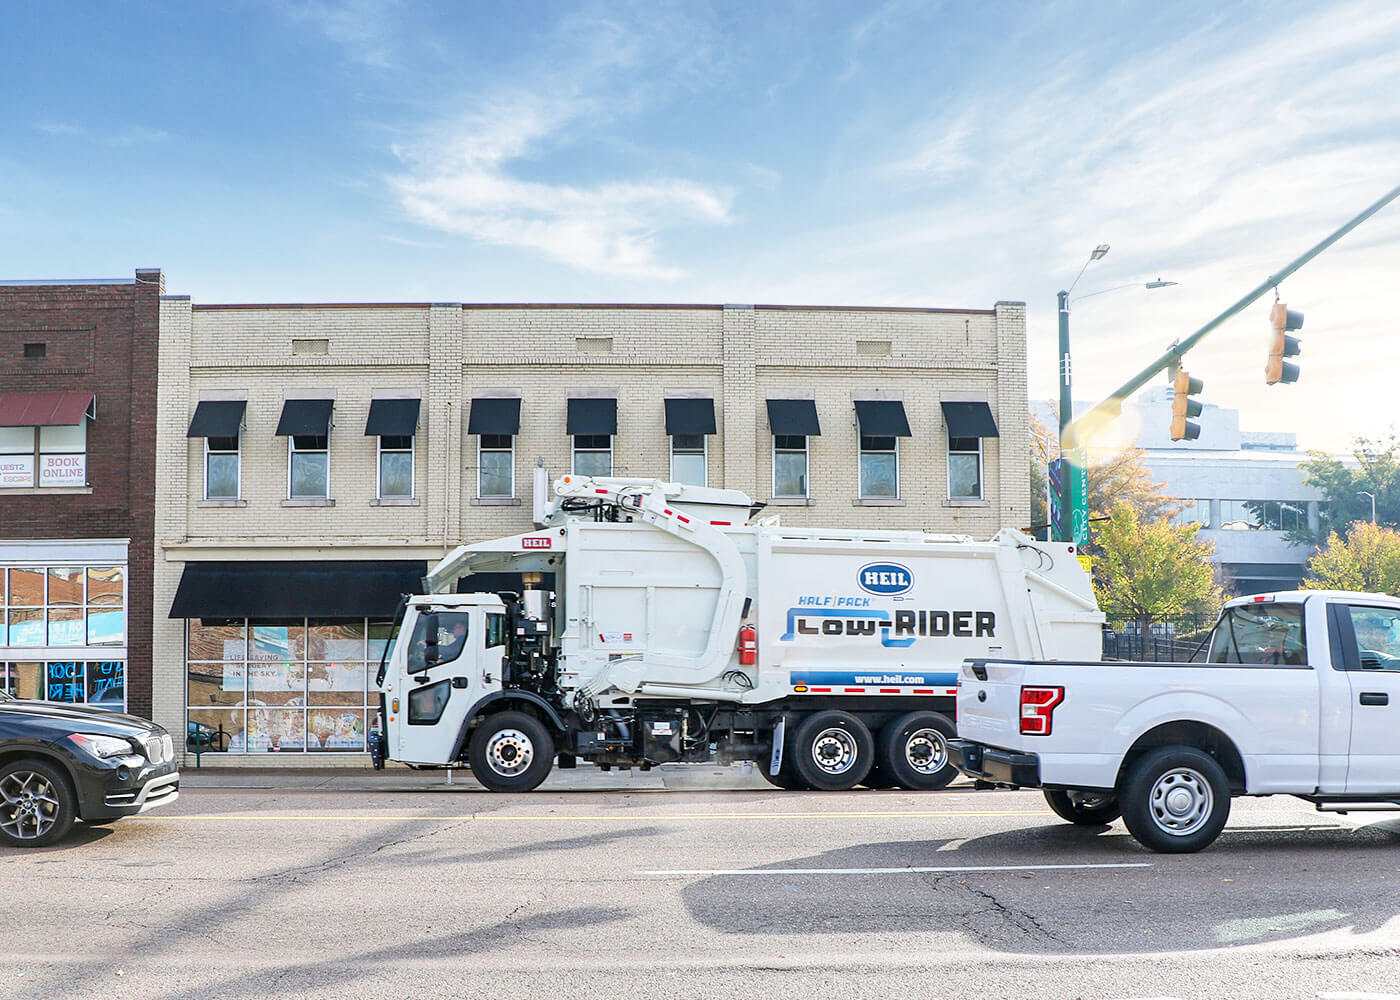 Low Profile Automated frontload trash trucks for large capacity residential trash collection